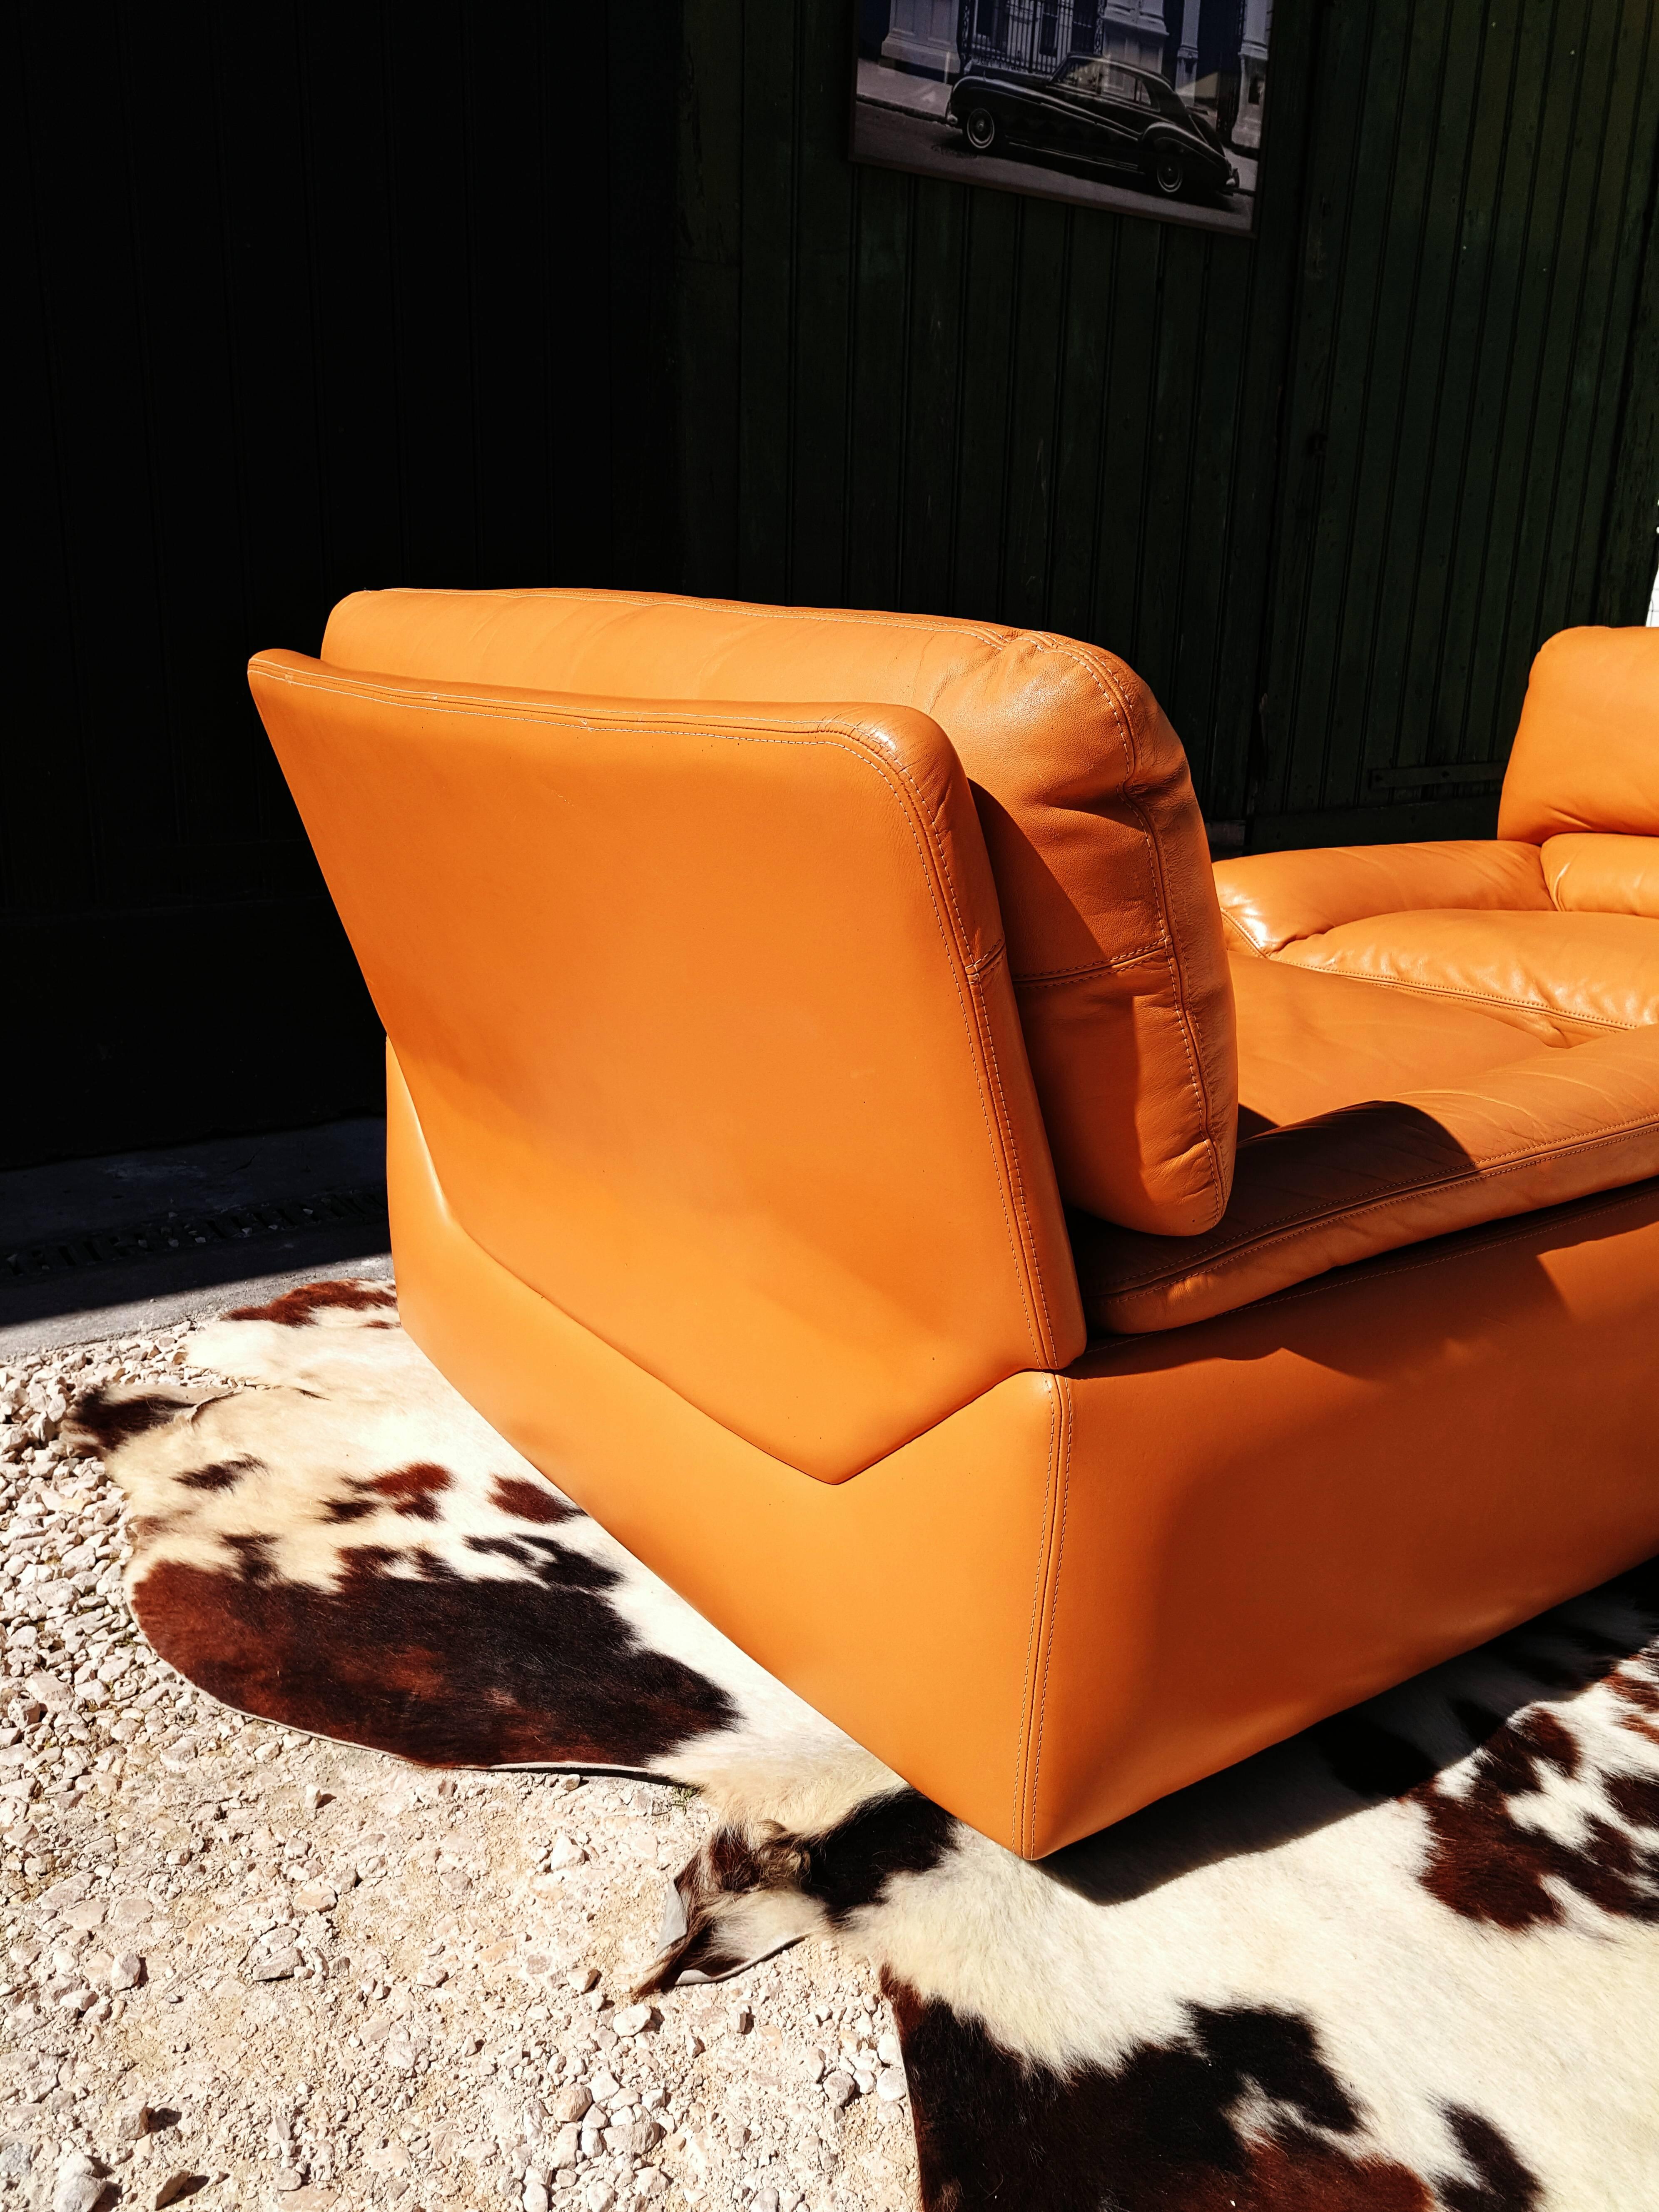 Late 20th Century Pair of Tan Leather Lounge Chairs with Ottoman by Anita Schmidt for Durlet 1970s